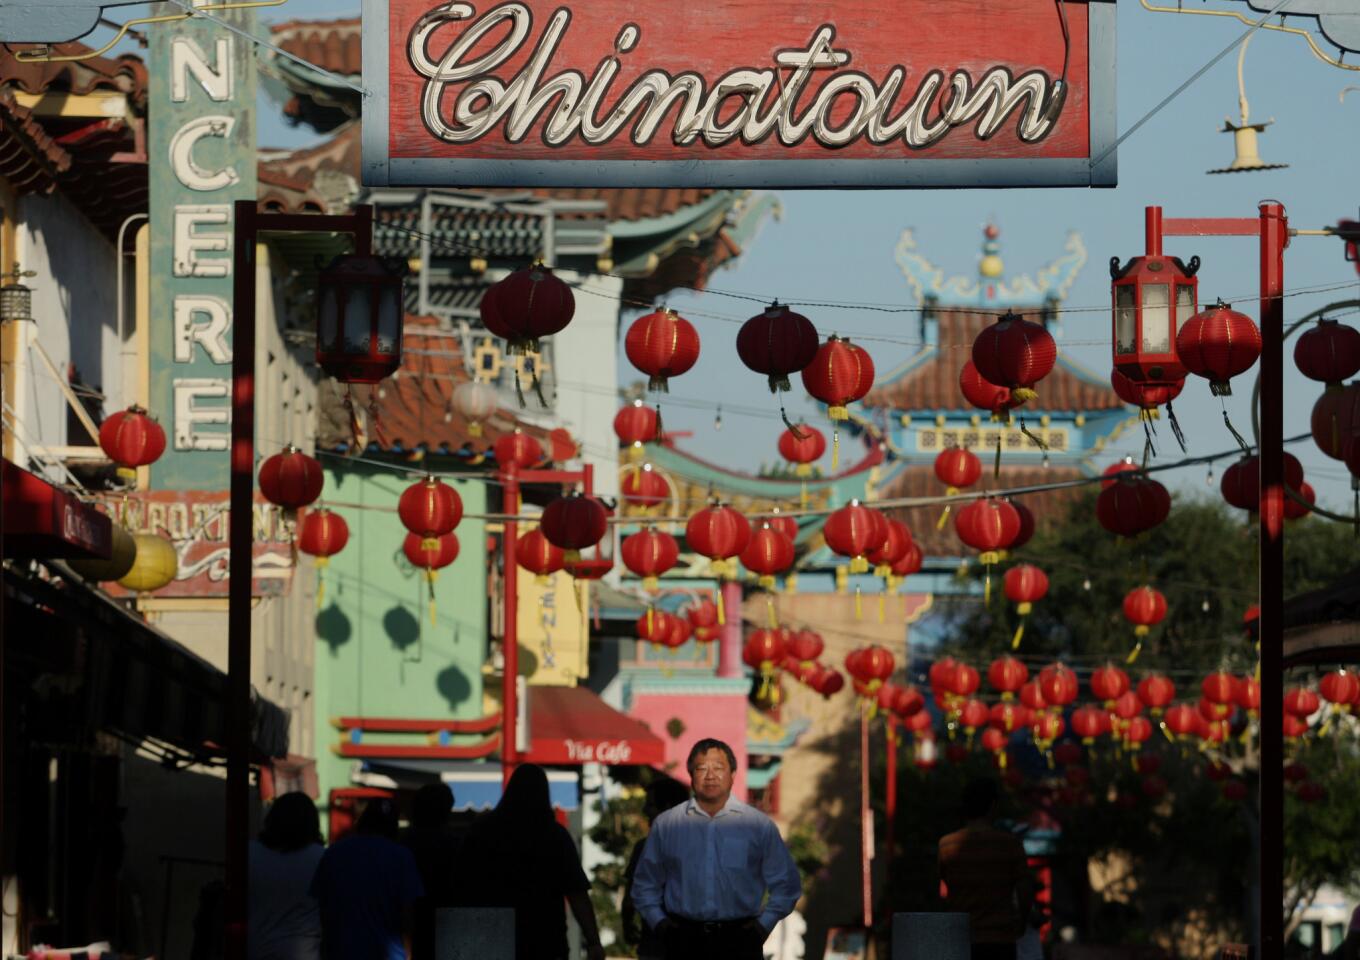 Los Angeles' Chinatown neighborhood is quickly becoming a revived culinary destination sparked by cheap rents and an art gallery boom.